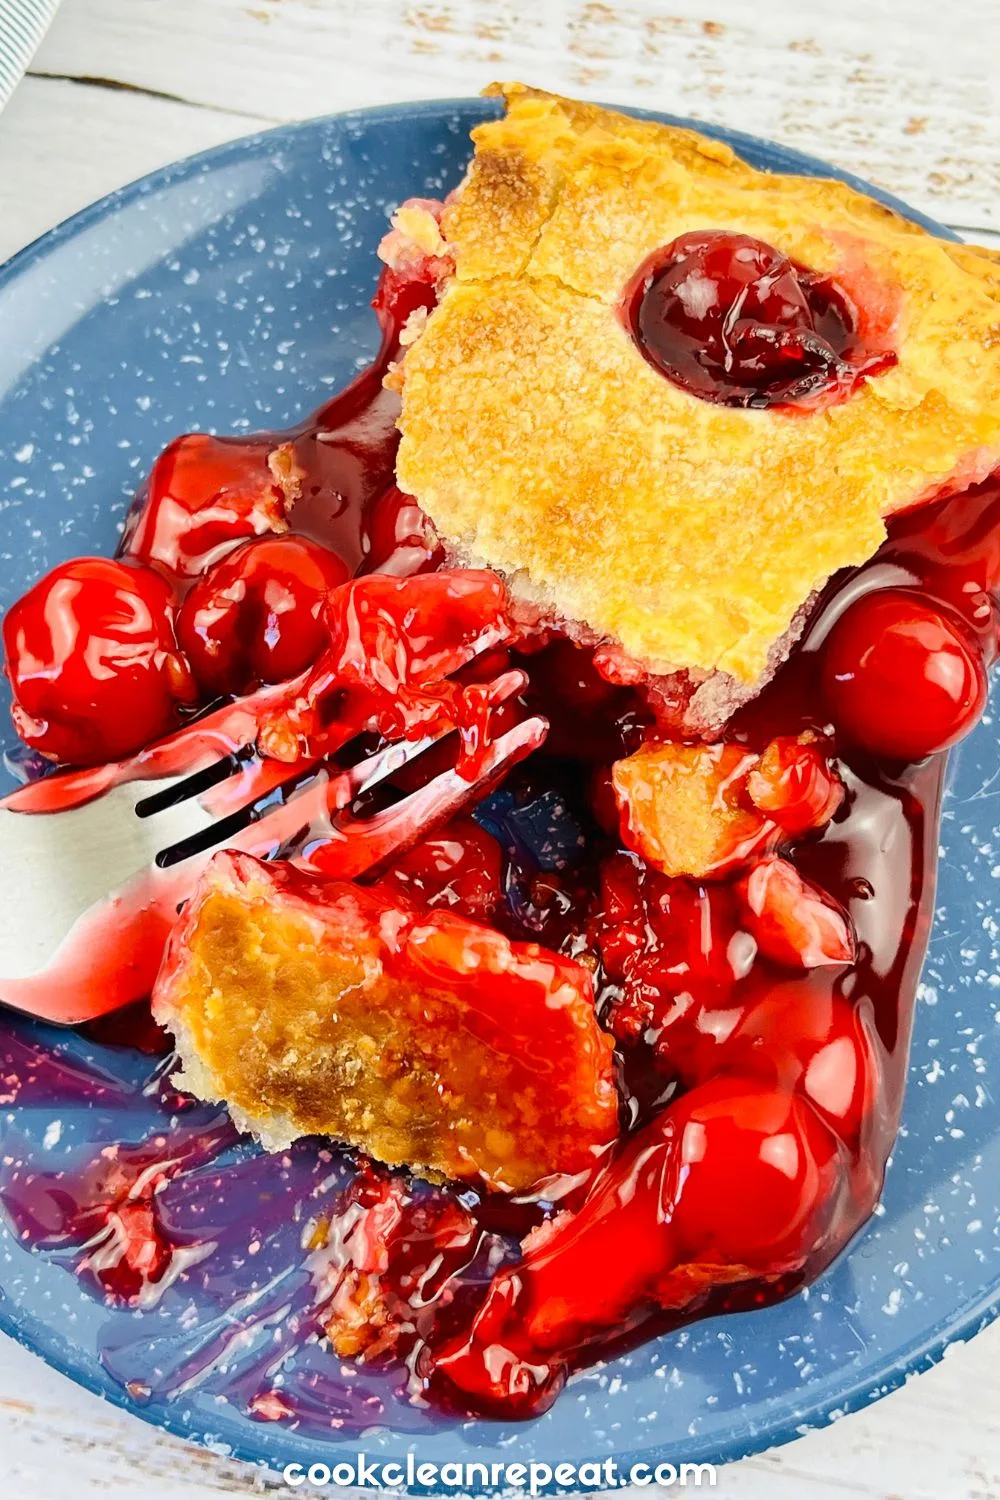 slice of cherry pie on a blue plate